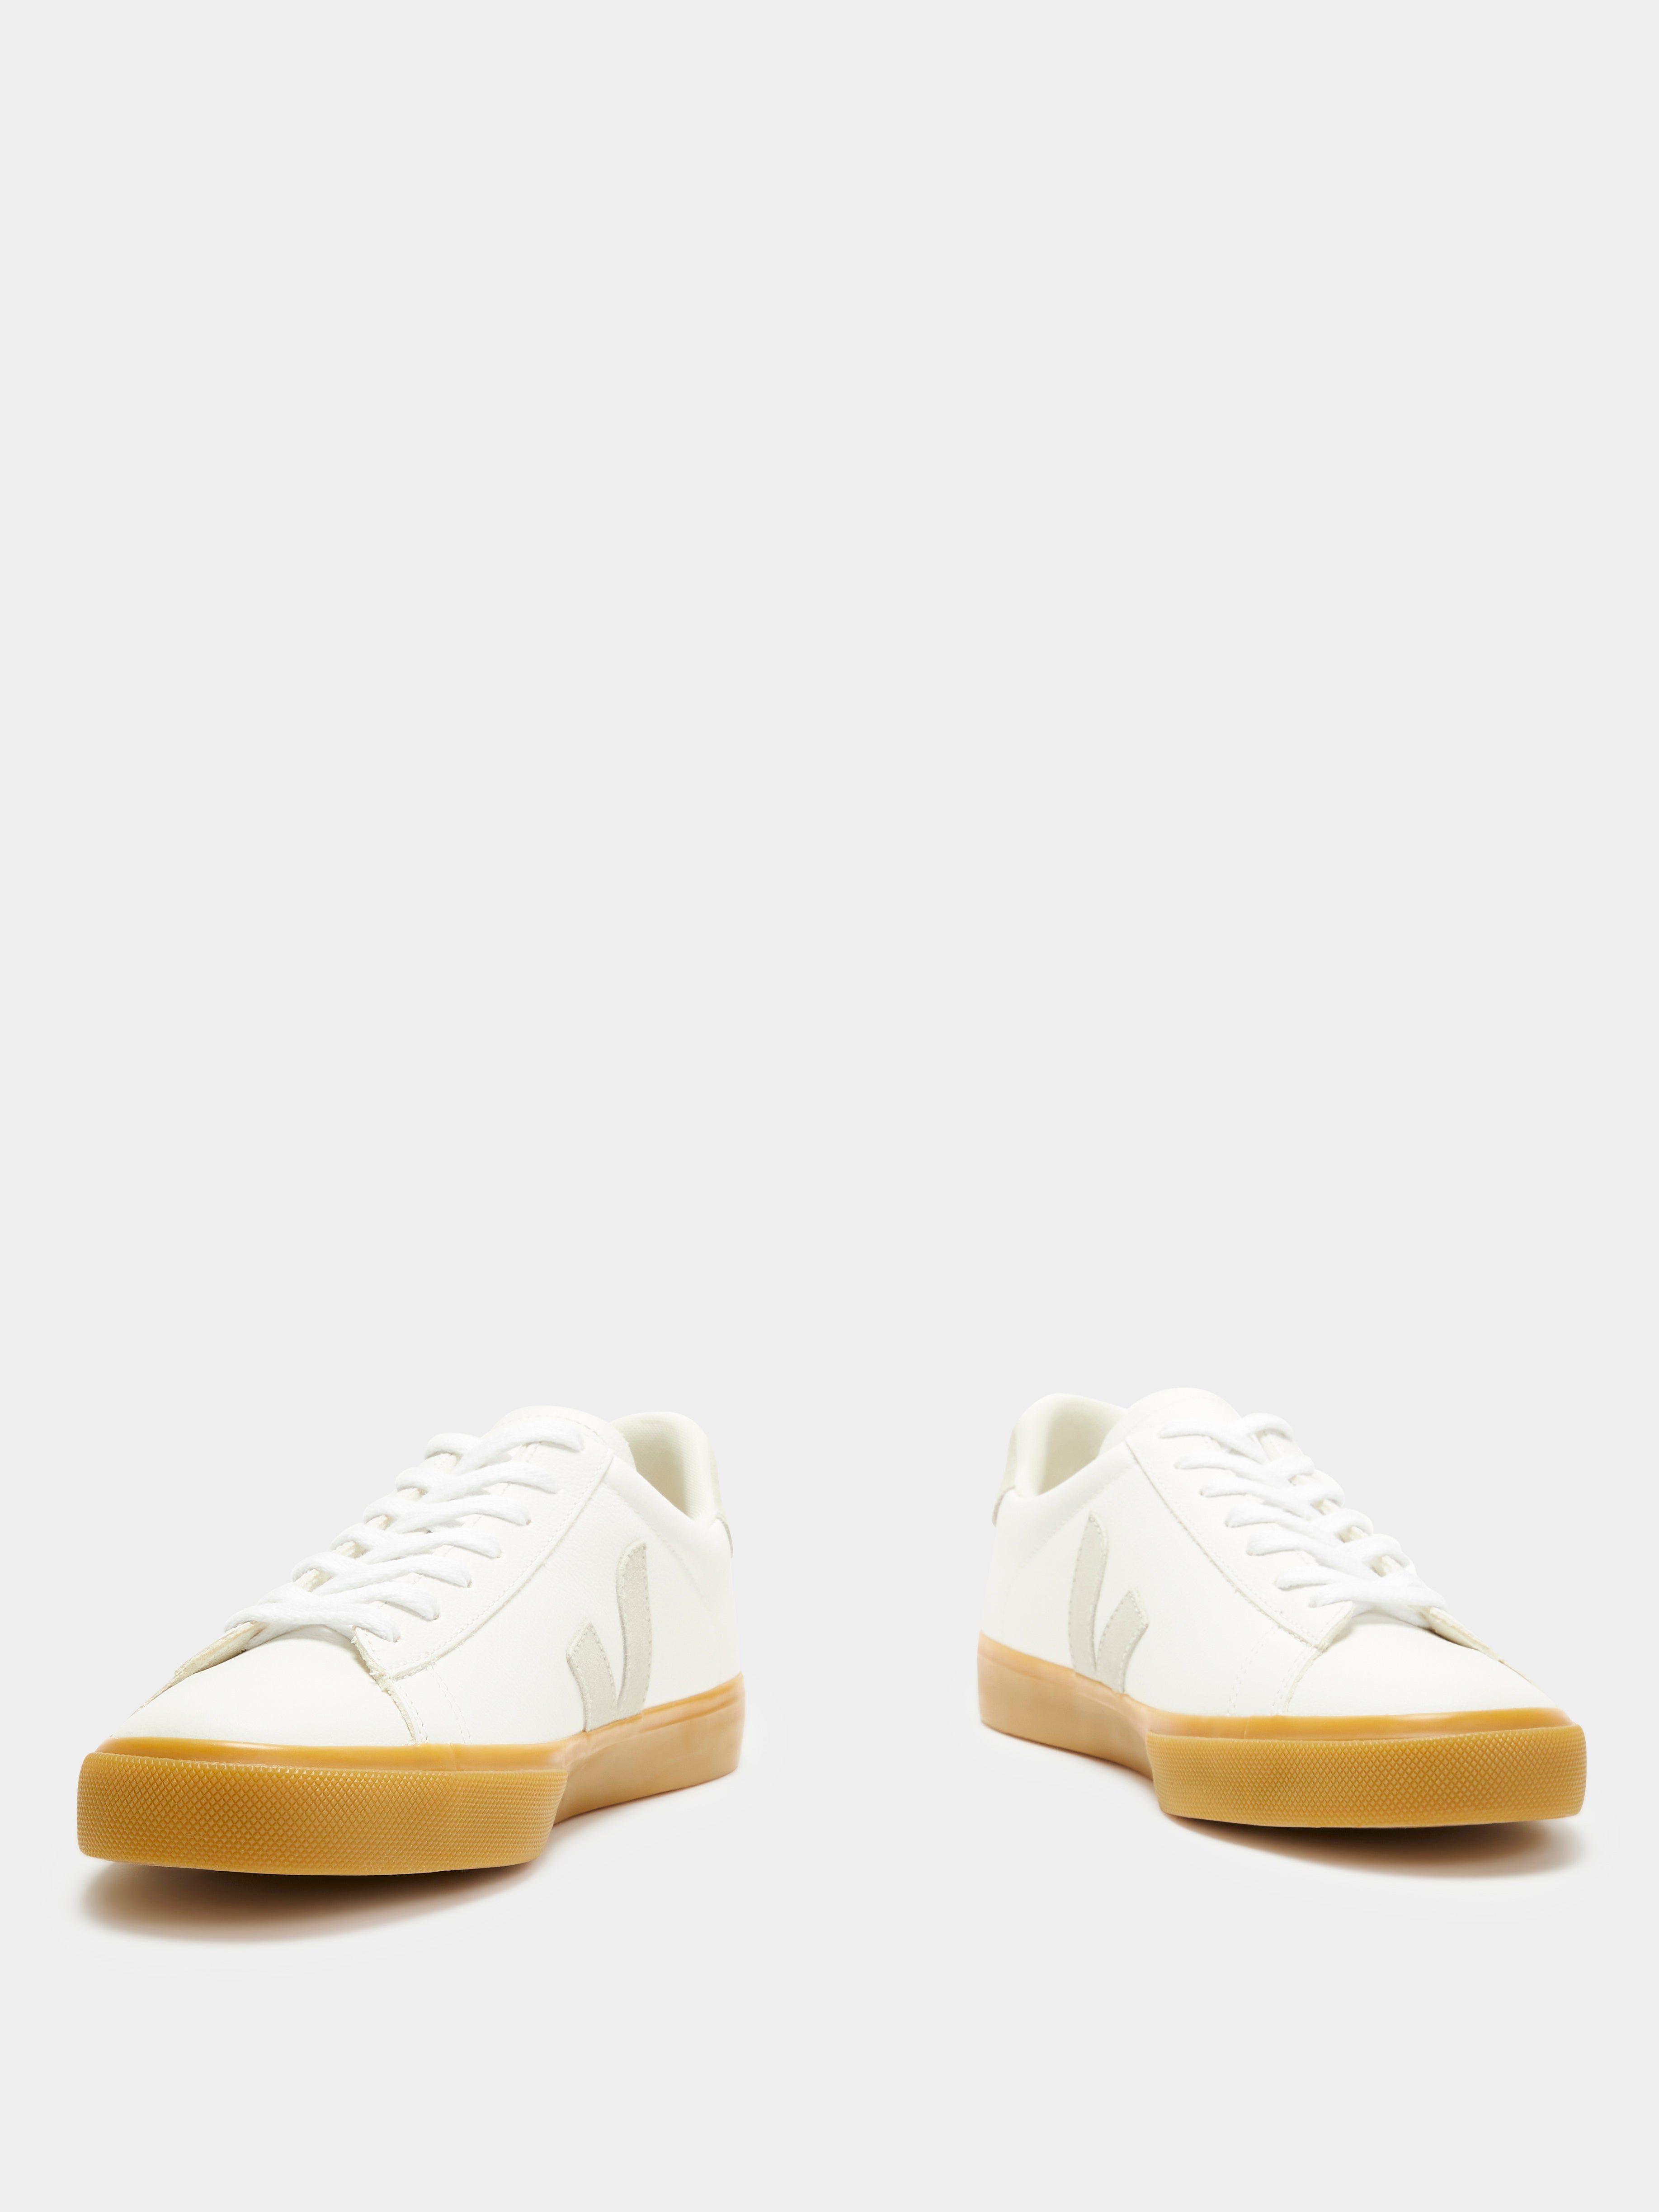 Mens Campo Leather Sneakers in White & Natural Gum